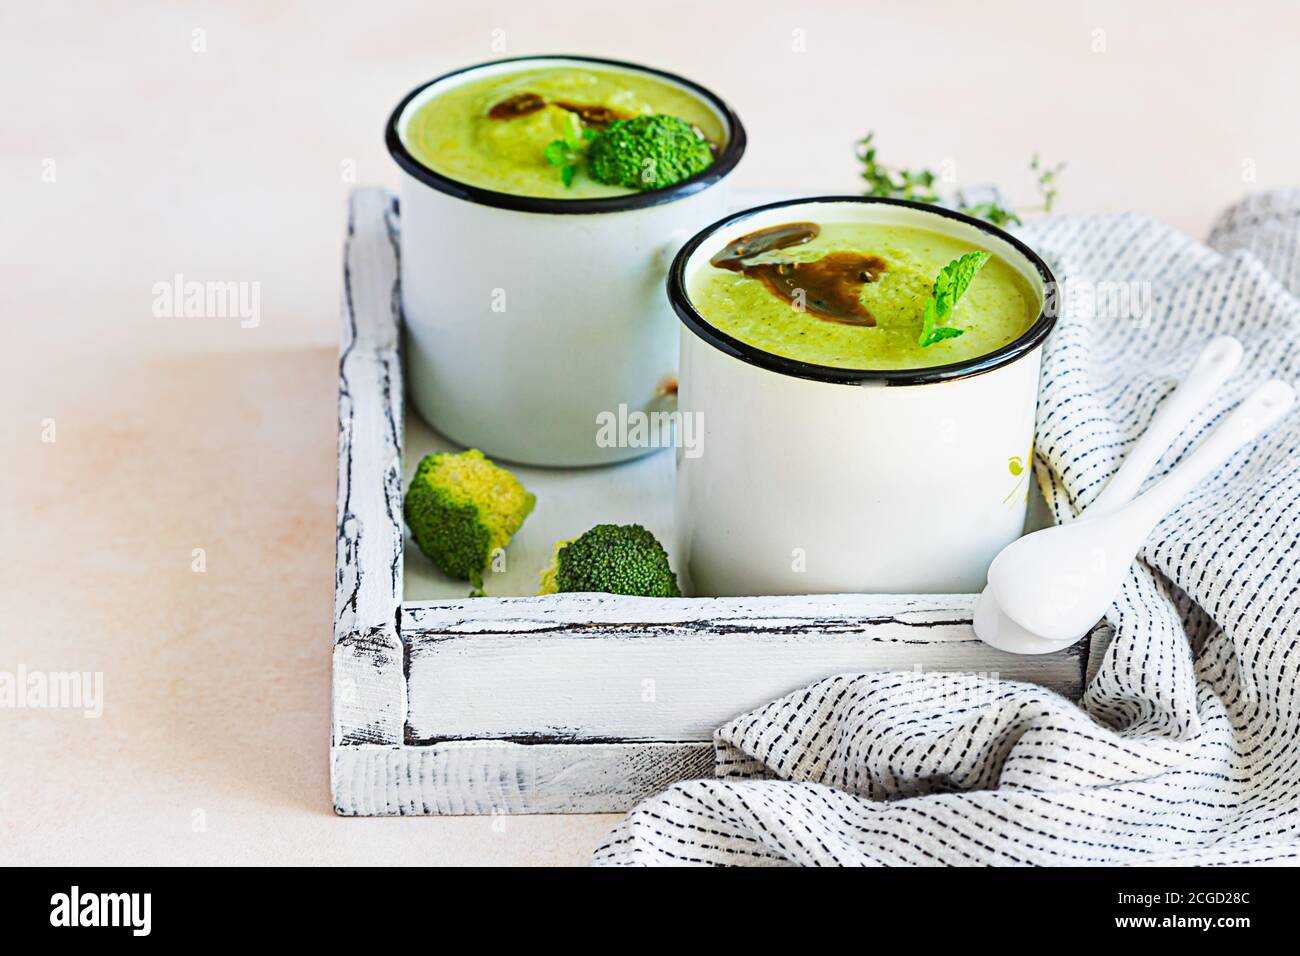 Two enamel mugs with healthy vegan broccoli soup with spicy oil and aromatic herbs over light stone background. Diet detox food concept. Stock Photo